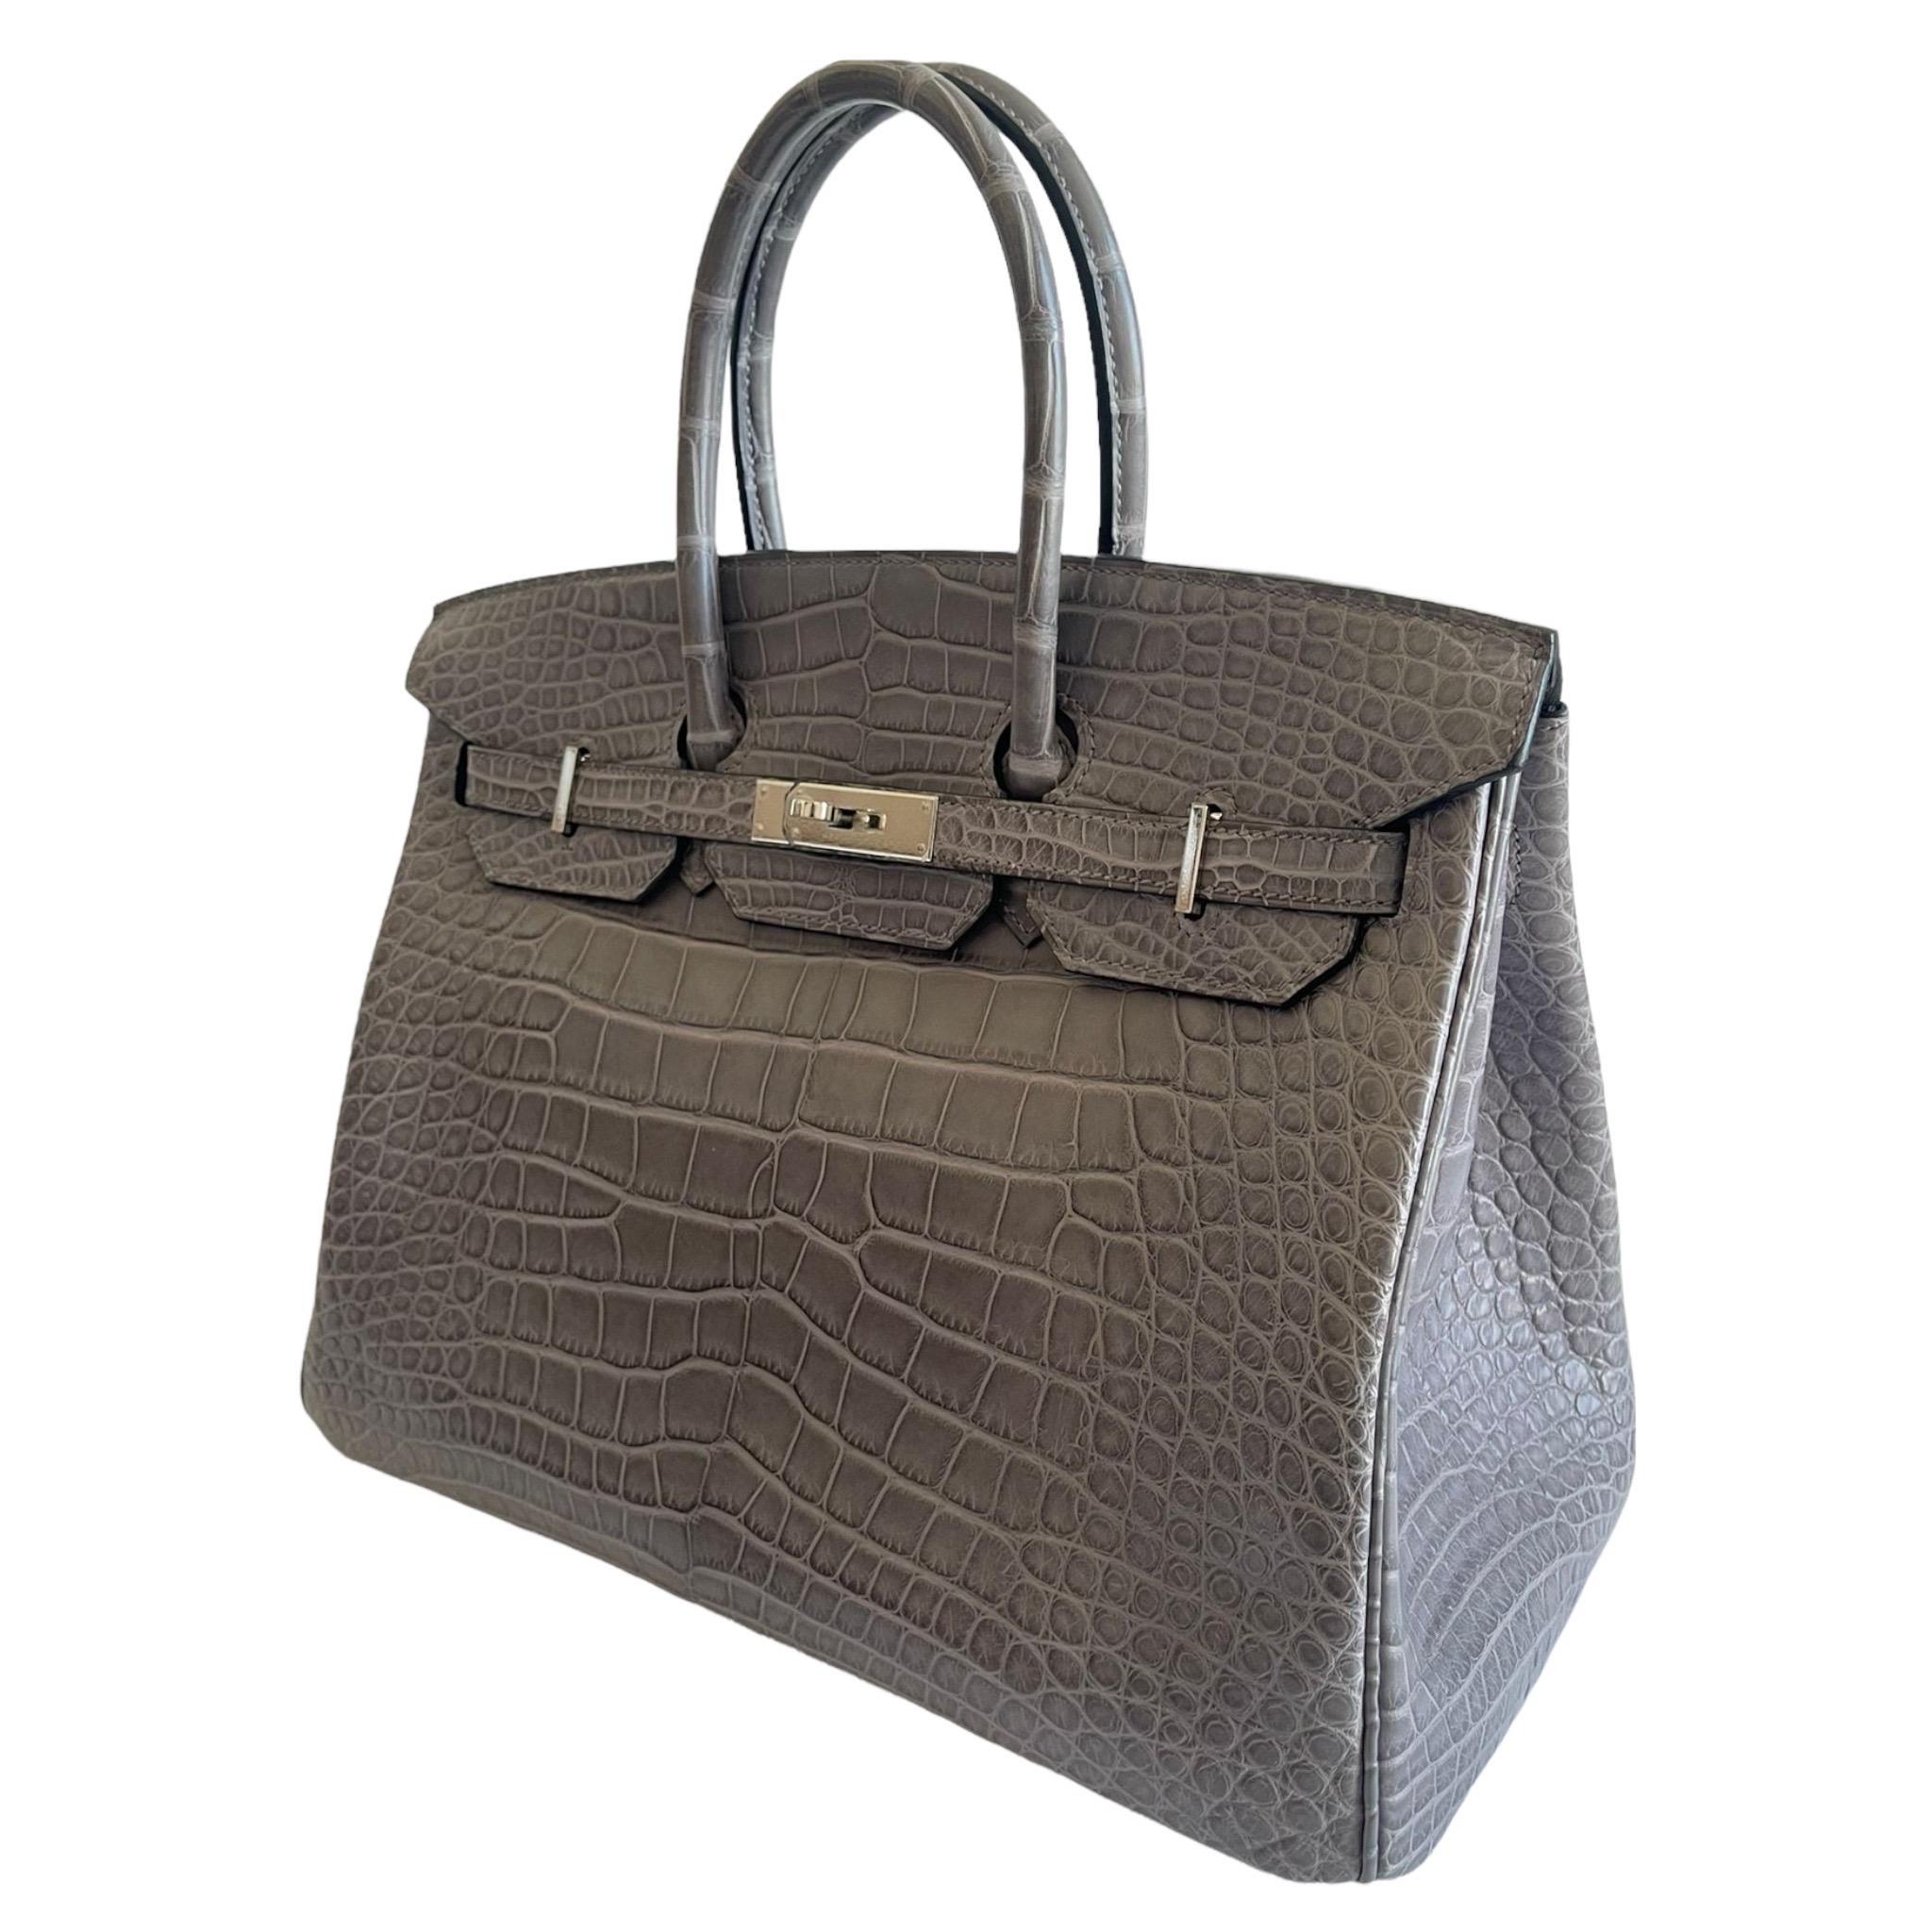 Brand: Hermès 
Style: Birkin Retourne
Size: 35cm
Color: Gris Paris
Leather: Matte Alligator 
Hardware: Palladium
Year: 2013 Q

Condition: Pristine, never carried: The item has never been carried and is in pristine condition complete with all